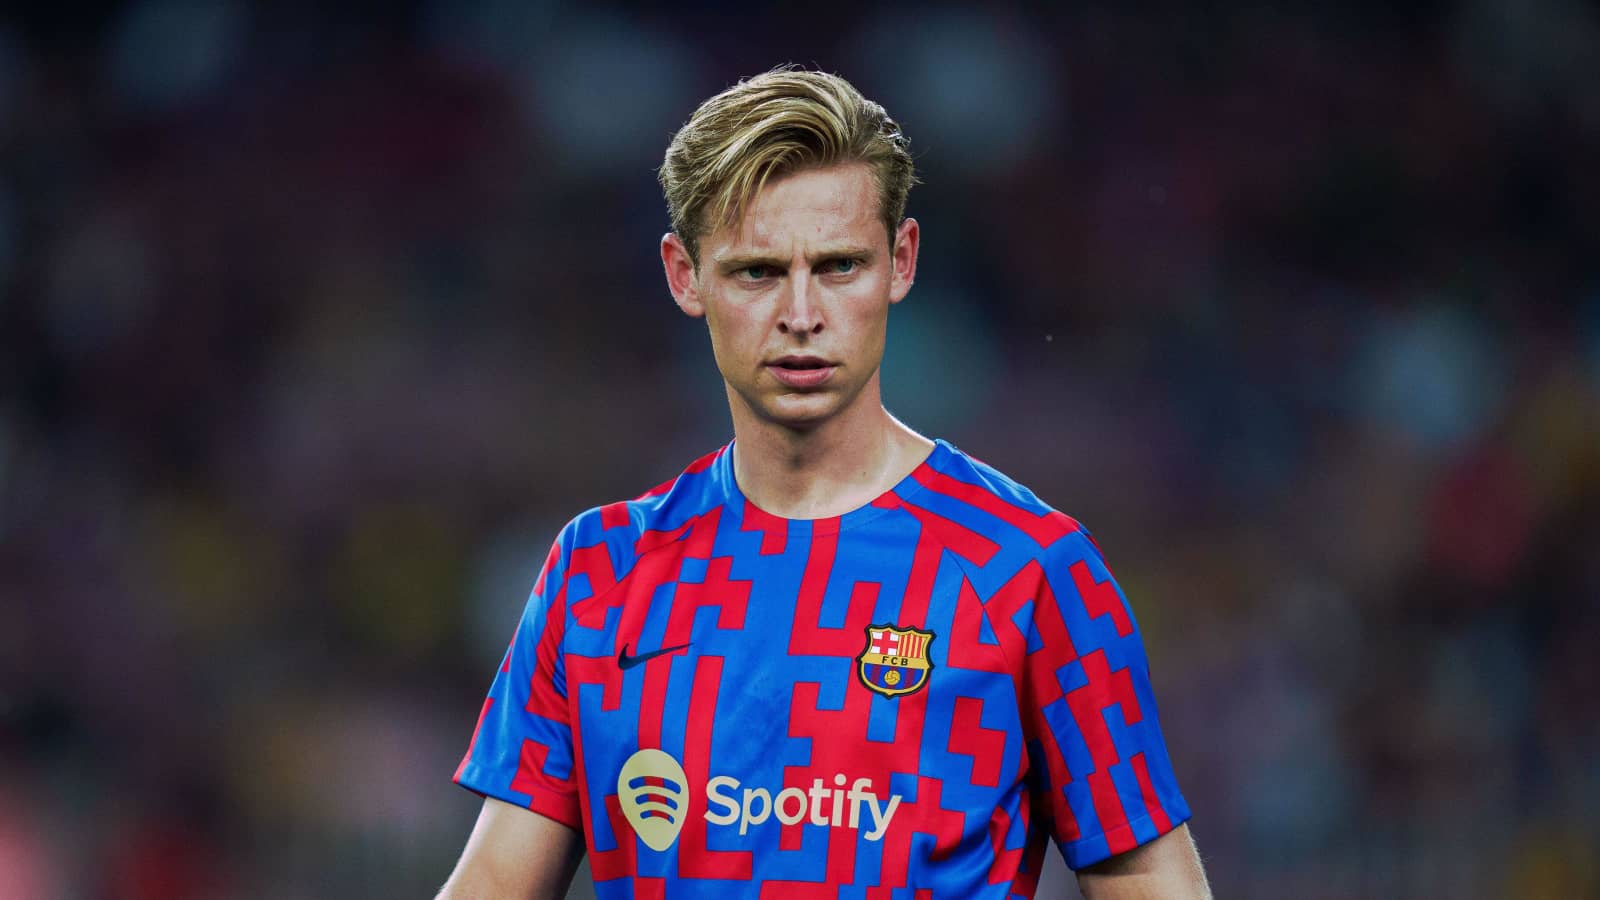 Frenkie de Jong Age, Salary, Net worth, Current Teams, Career, Height, and much more